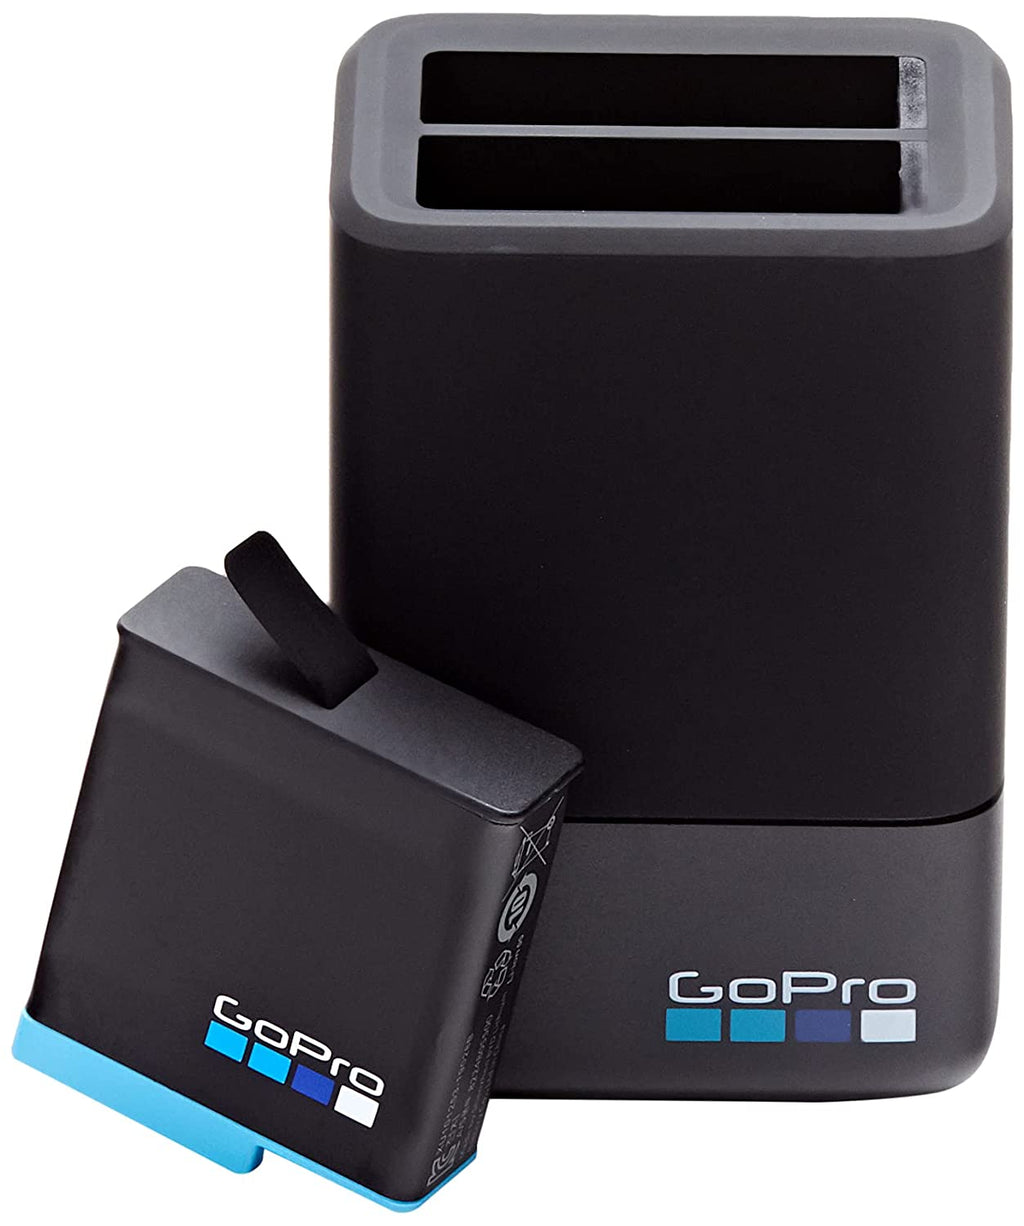 Gopro Ajdbd 001 Eu Dual Battery Charger Plus Extra Battery